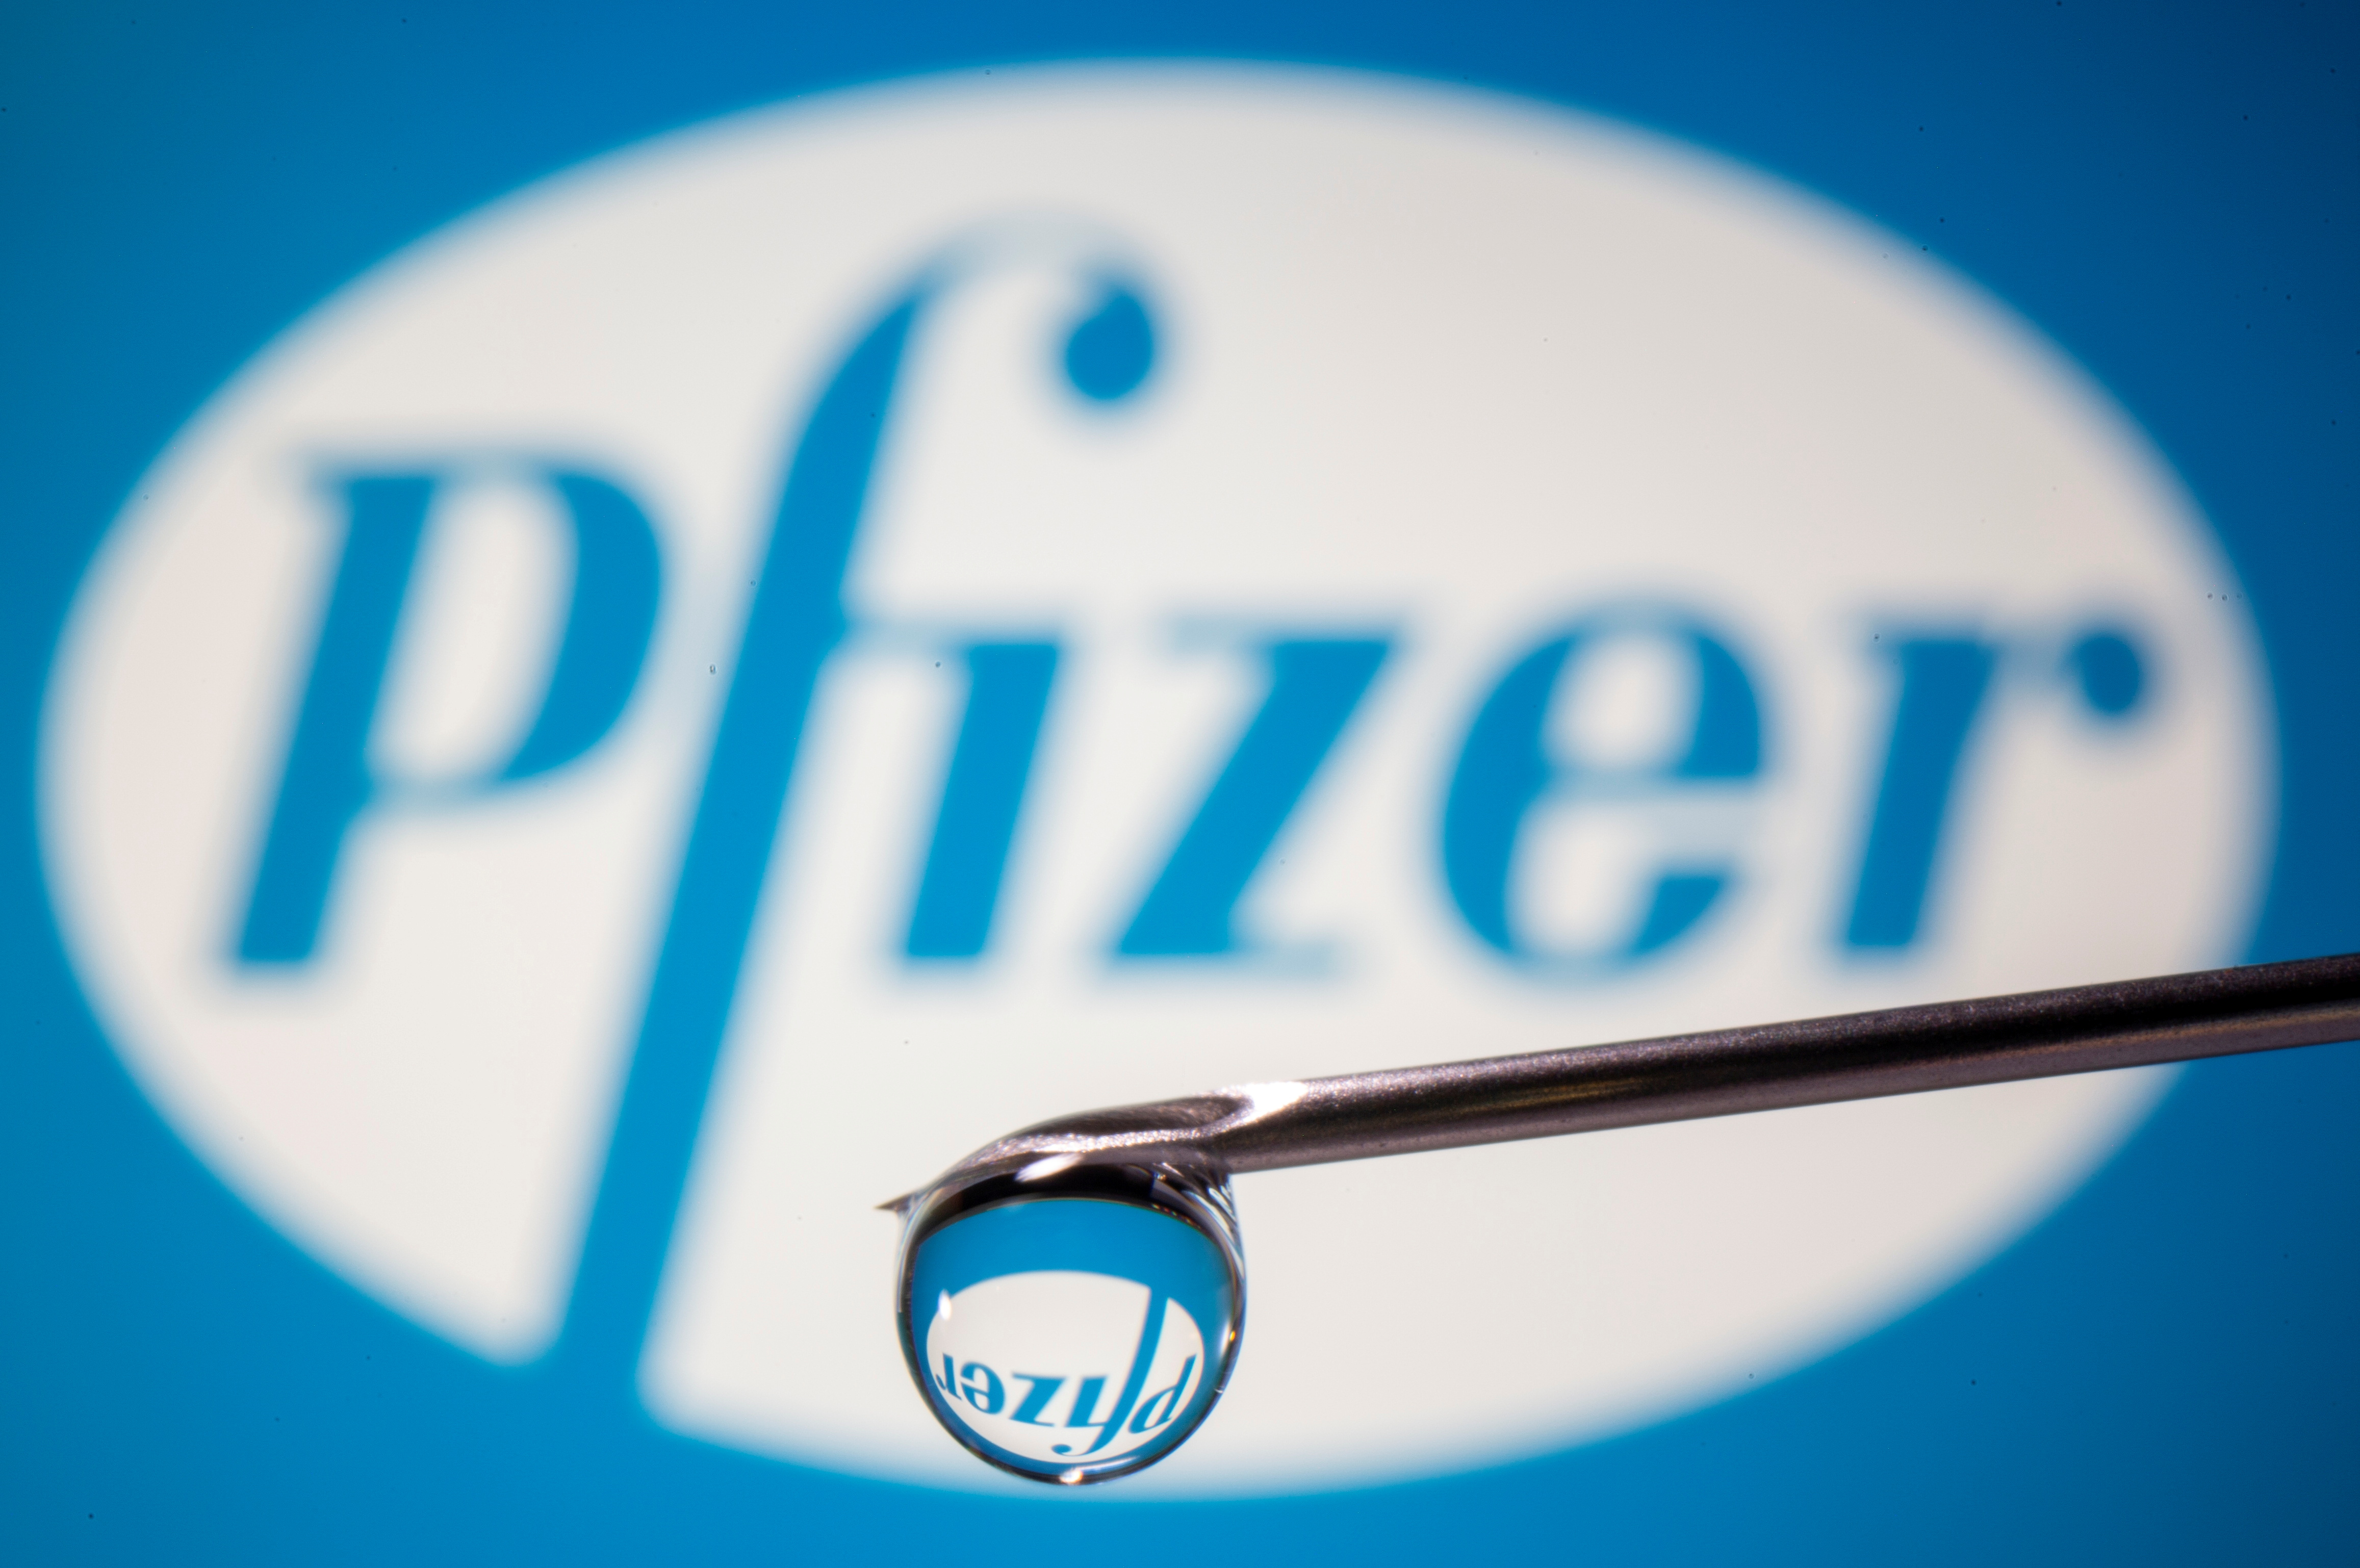 Pfizer's logo is reflected in a drop on a syringe needle in this illustration